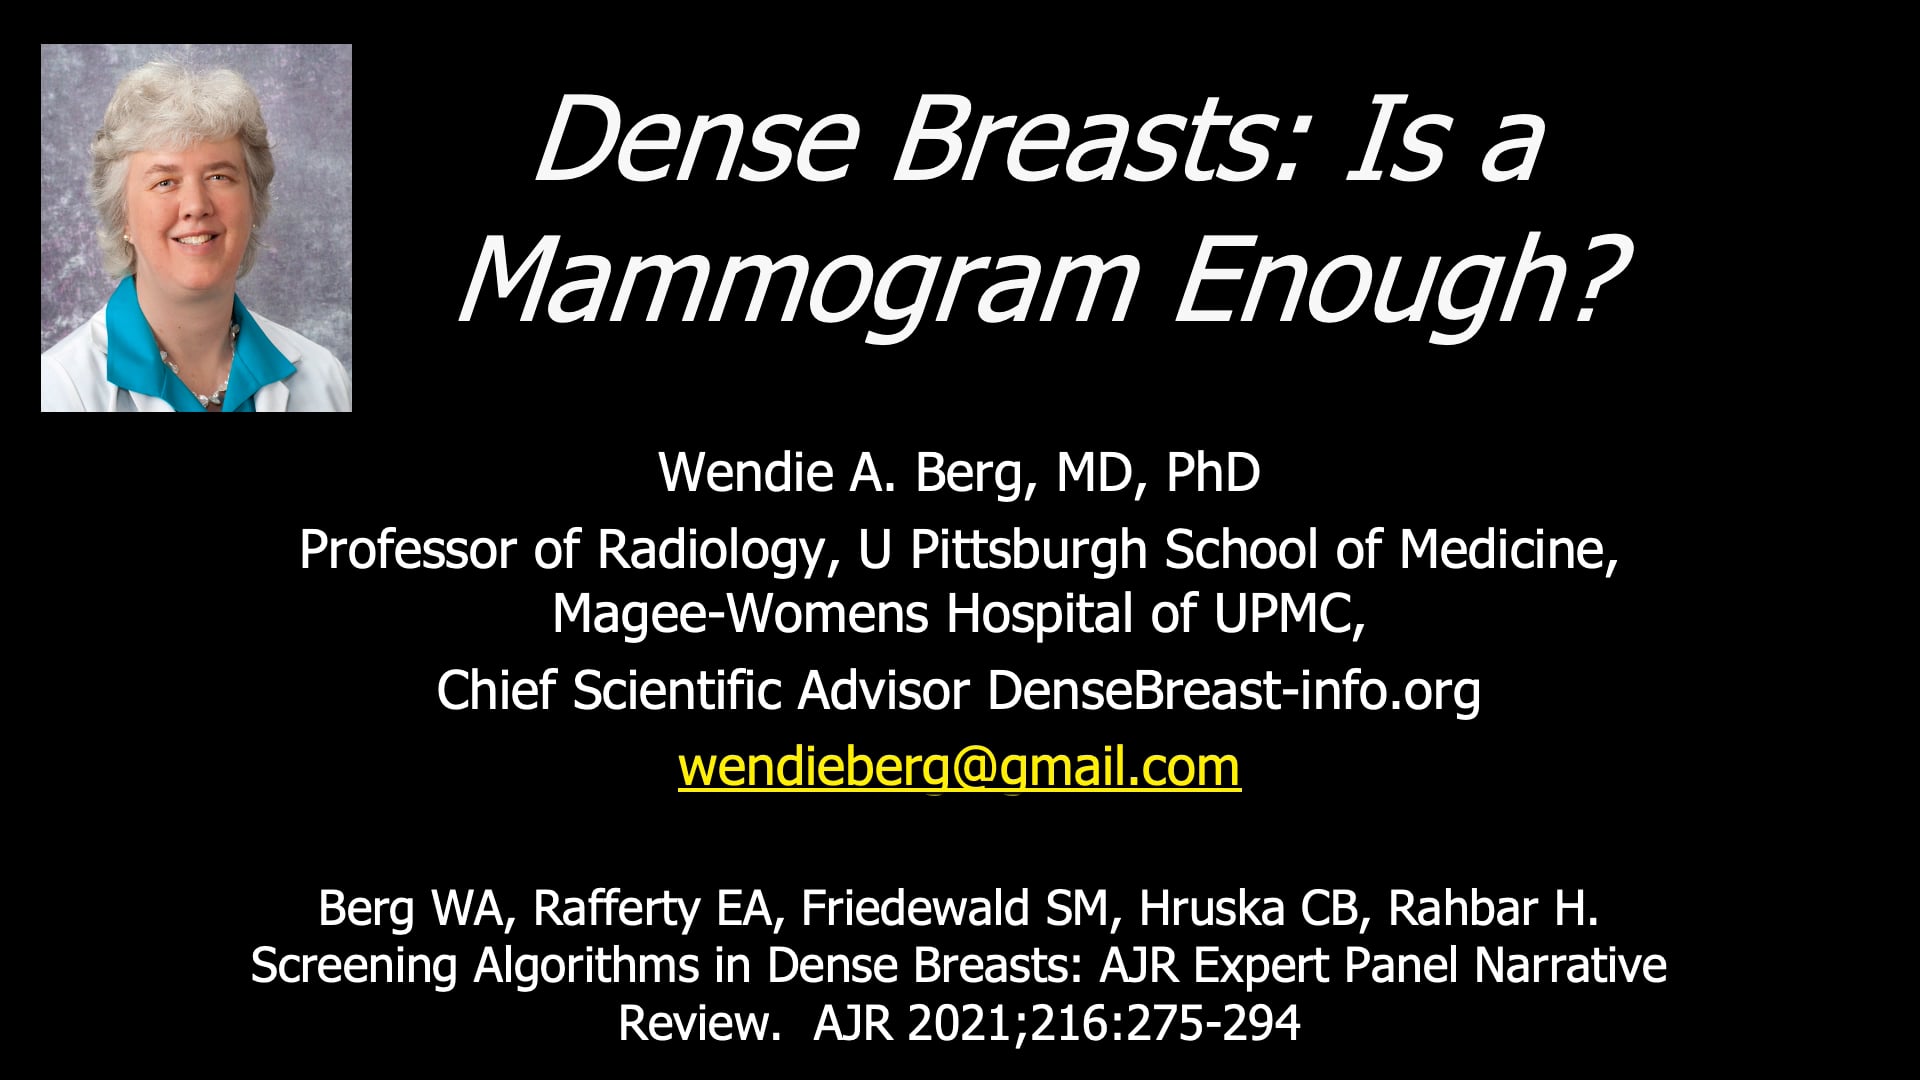 "Dense Breasts: Is a Mammogram Enough?" - Right Breast Cancer Screening for You